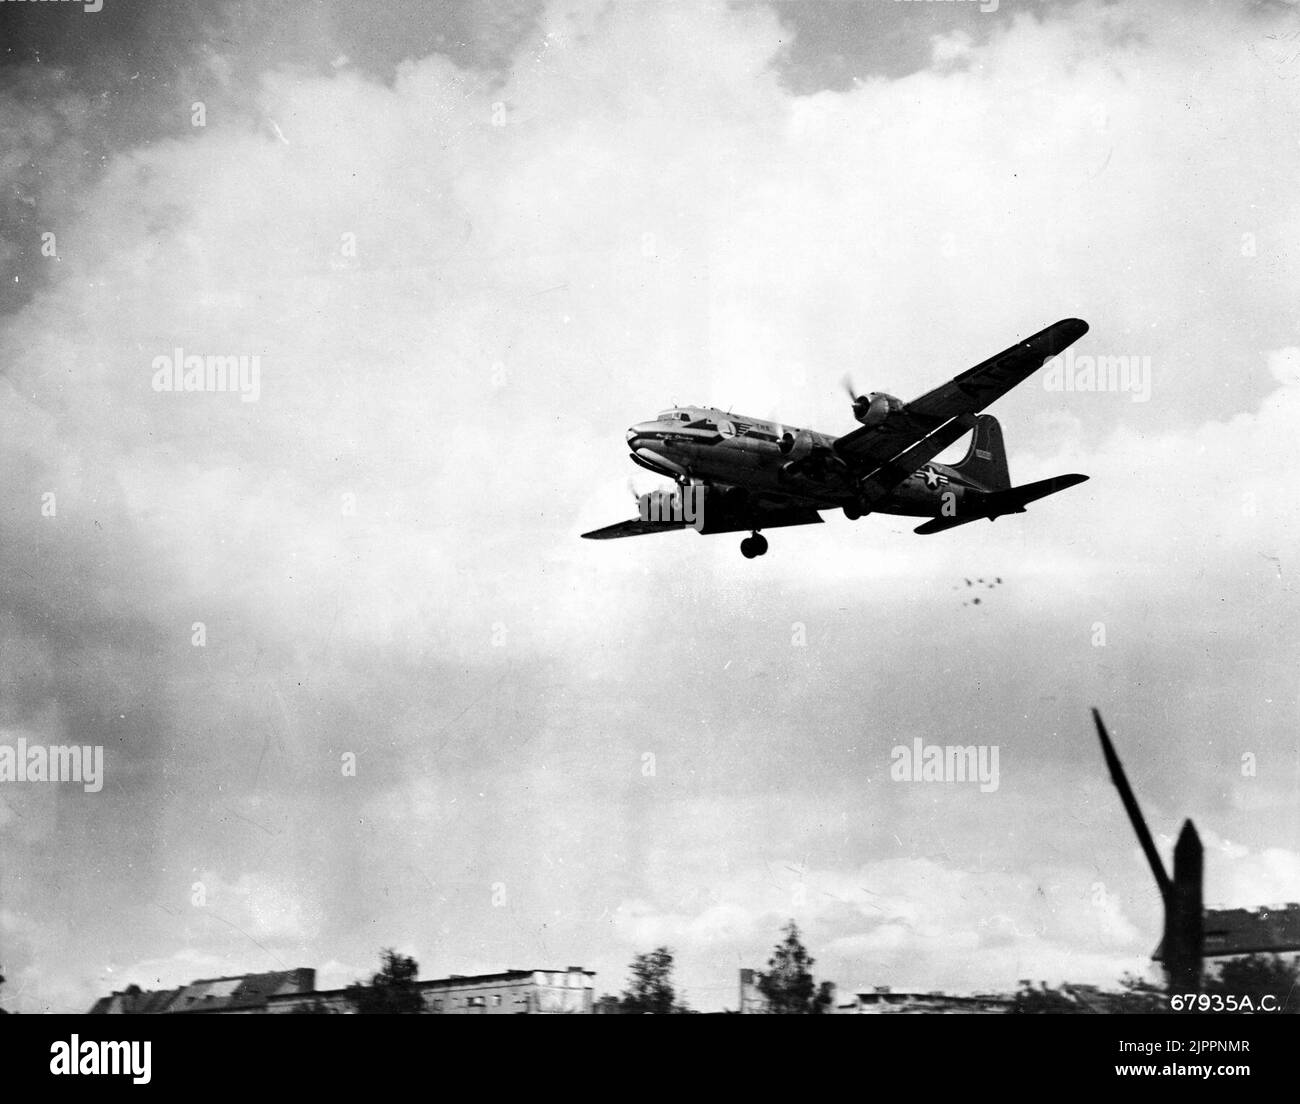 C-54 dropping candy during Berlin Airlift, circa 1949. A U.S. Air Force Douglas C-54 Skymaster making a 'Little Vittles' candy drop (note the parachutes below the tail of the C-54) on approach to a Berlin airfield. Aircrews dropped candy to children during the Berlin Airlift. Stock Photo